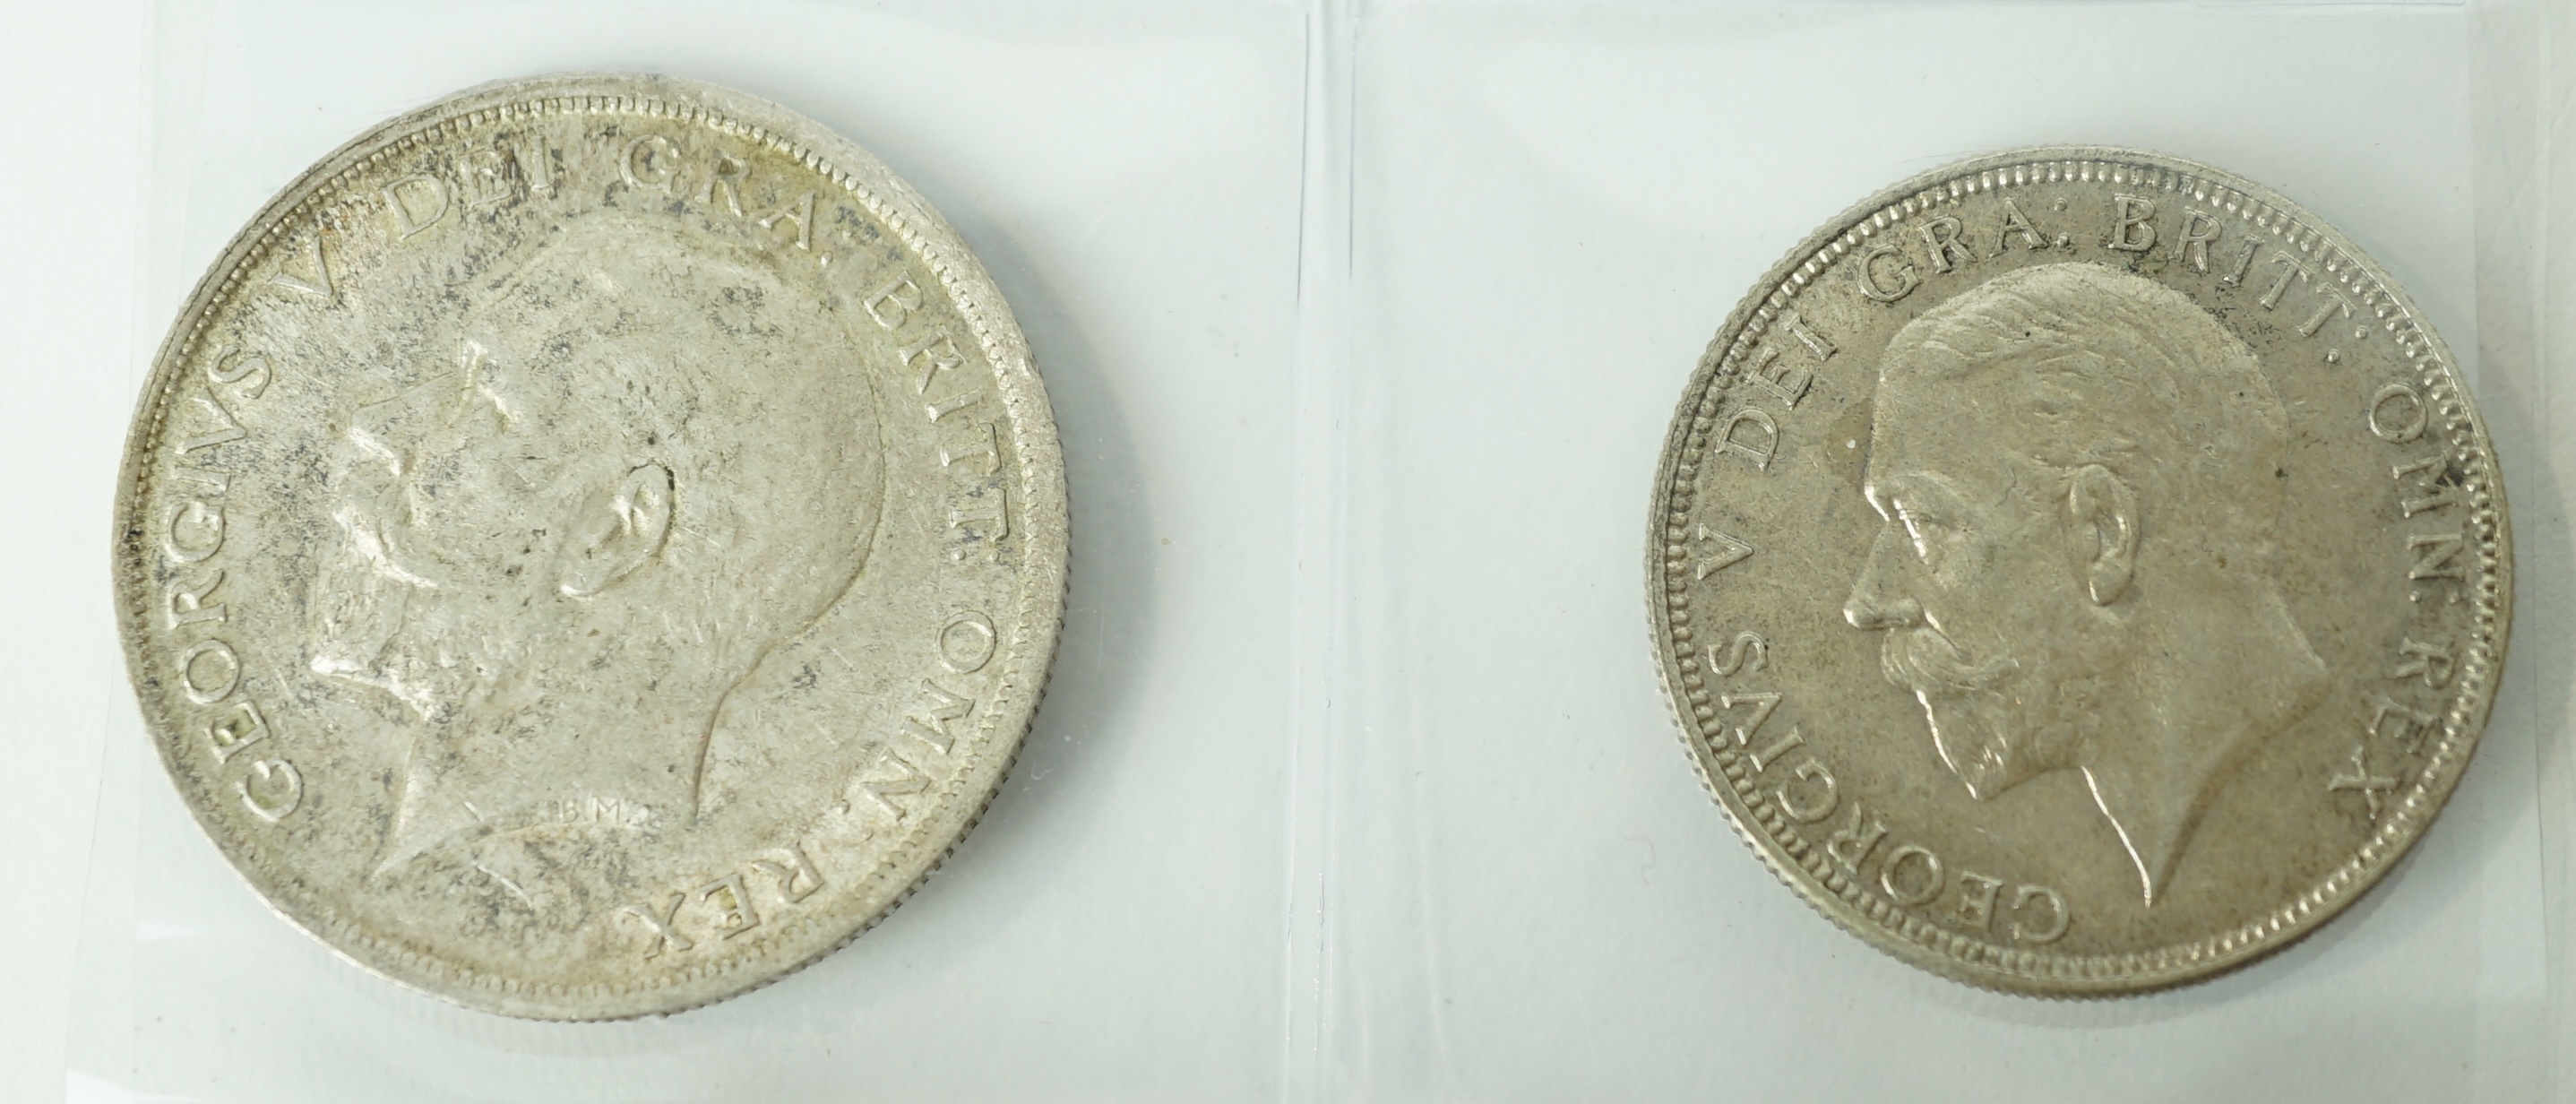 British silver and cupronickel coins, Edward VII to QEII (1902-1981), the majority pre-decimal Crowns to maundy 1d